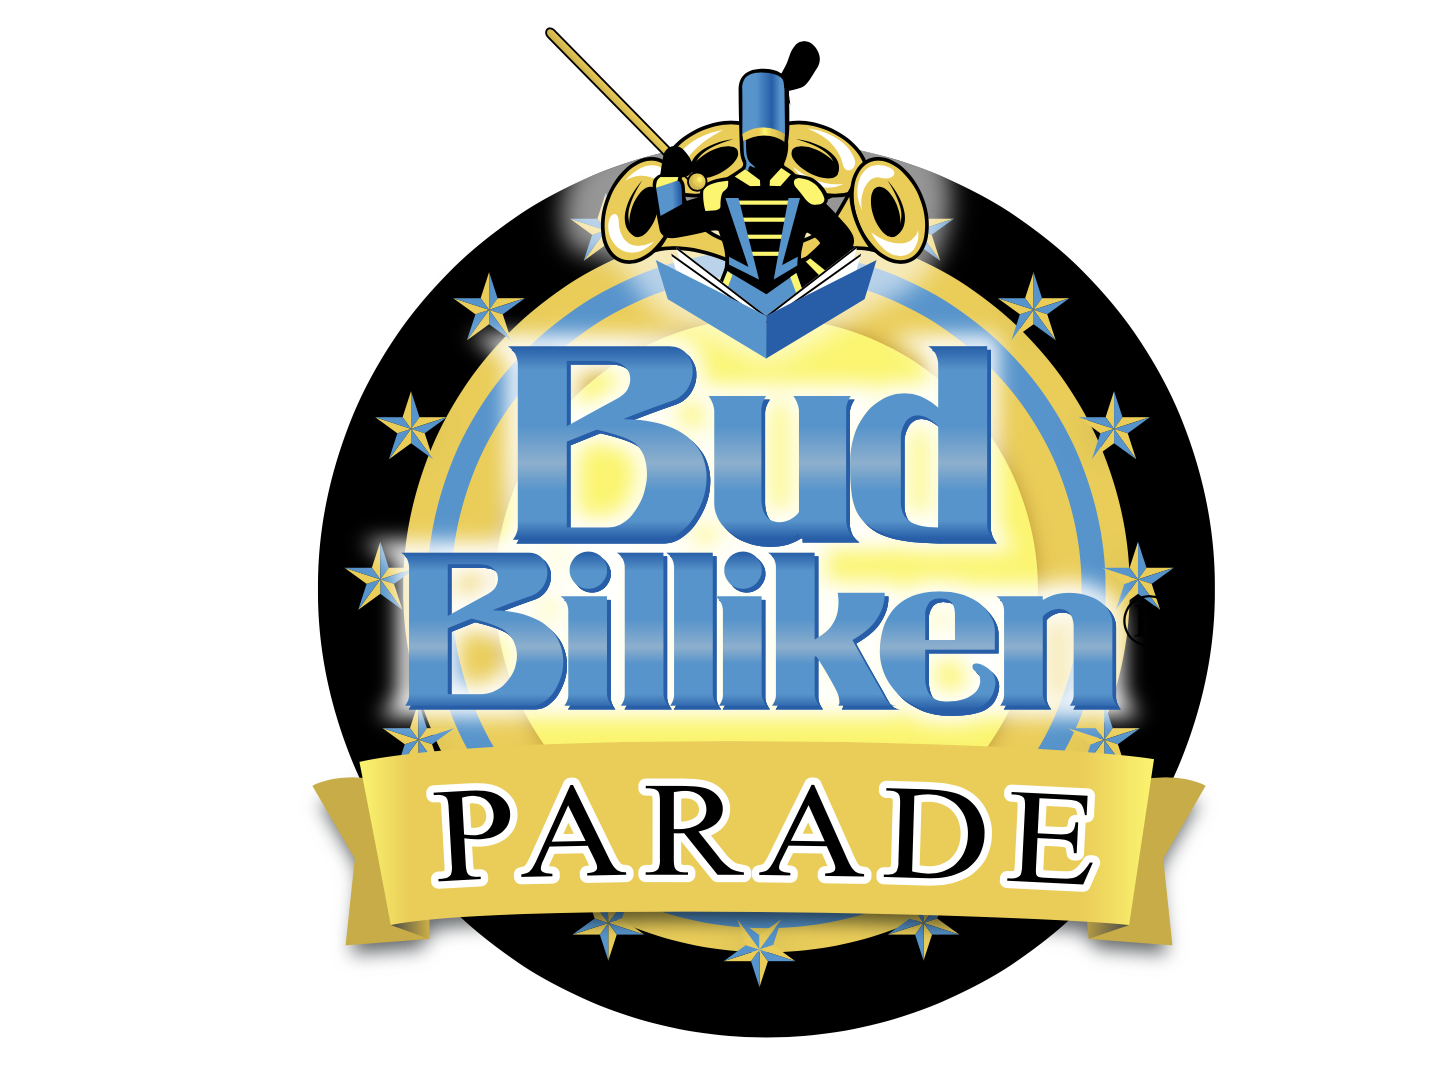 WCIU, The U Four facts about the Bud Billiken Parade